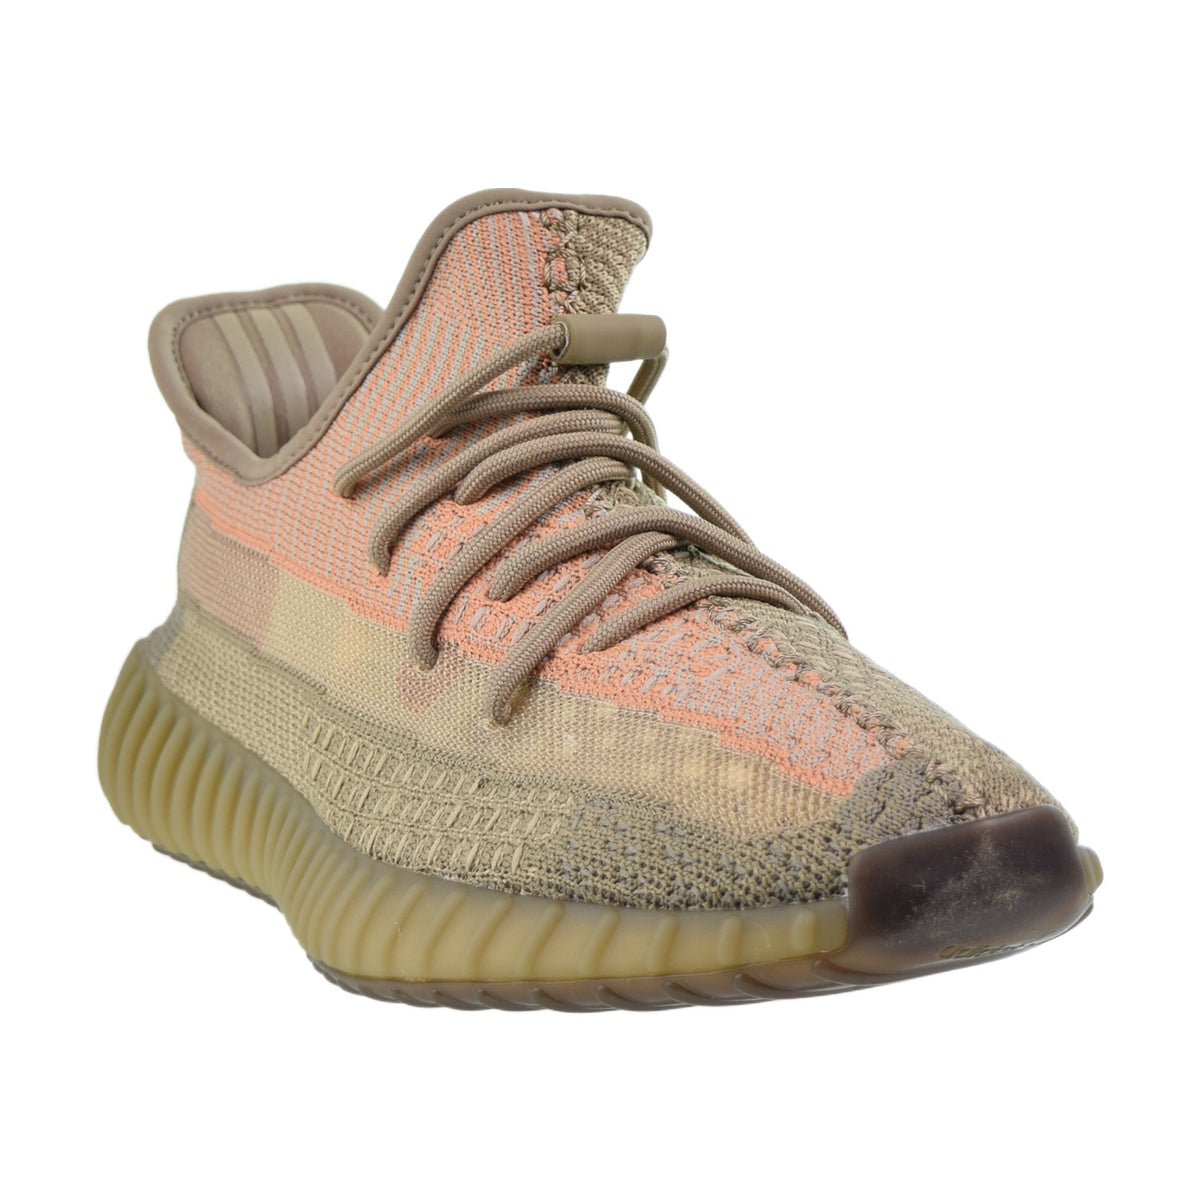 Adidas Yeezy Boost 350 V2 Men's Shoes Sand Taupe